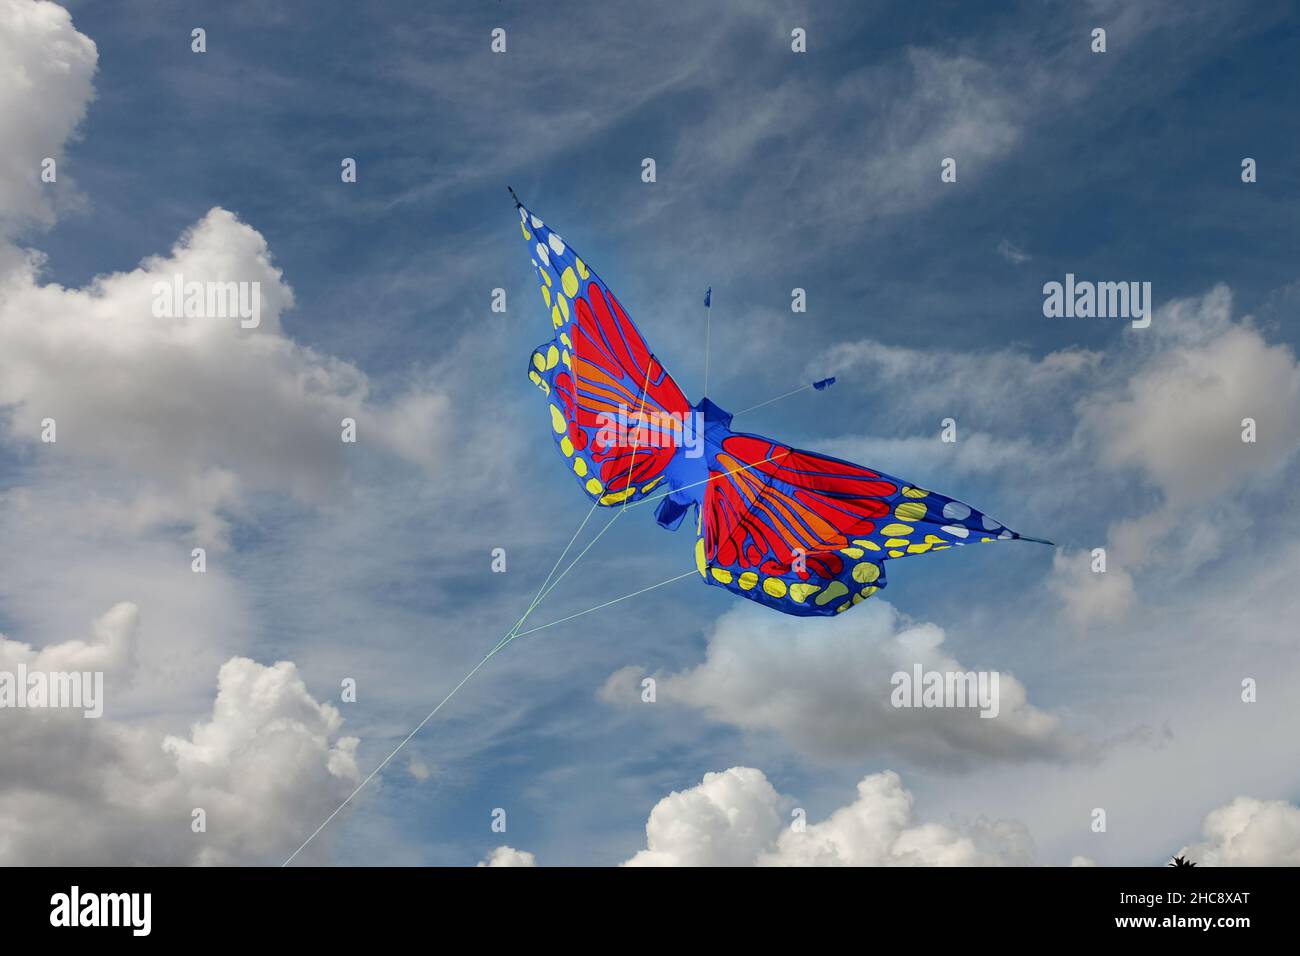 A kite in the shape of a butterfly flying against a blue sky. Stock Photo